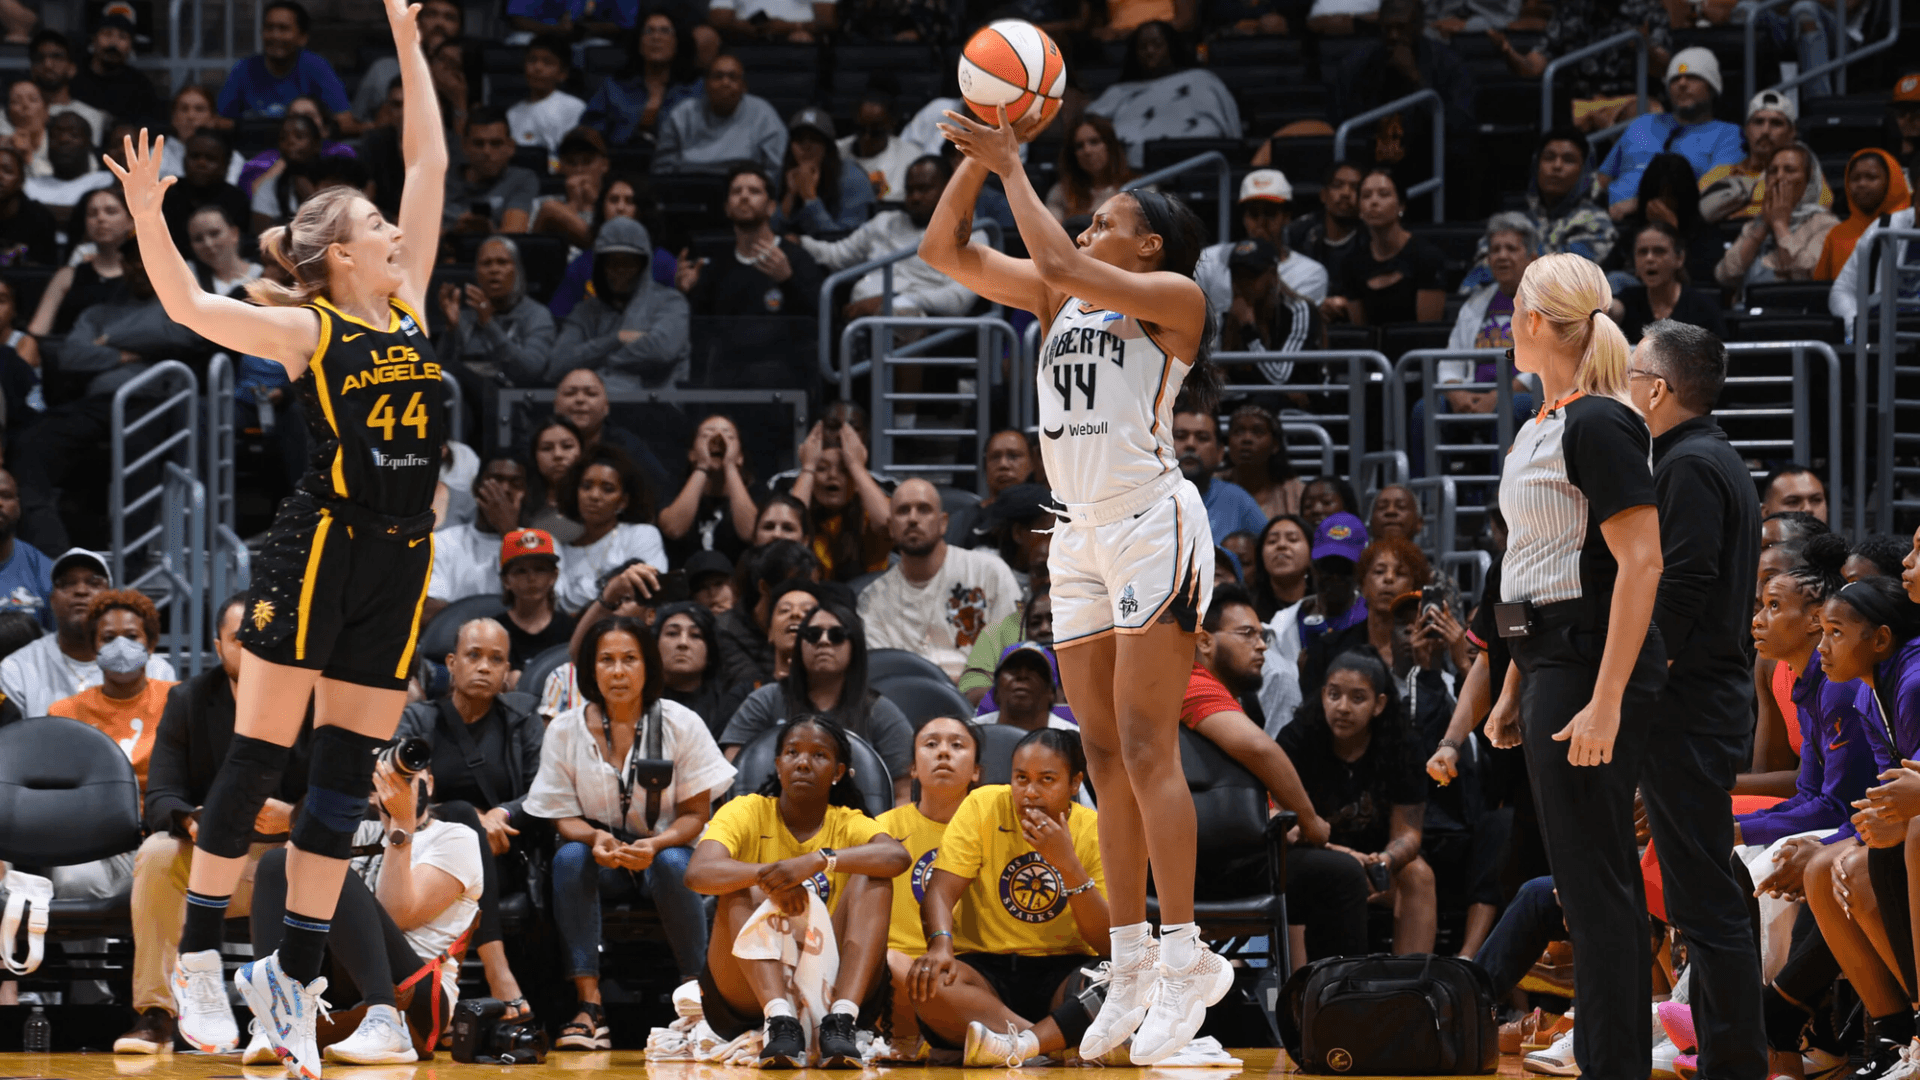 Los Angeles Sparks vs New York Liberty Prediction, Odds & Best Bets: Sparks must win to stay alive